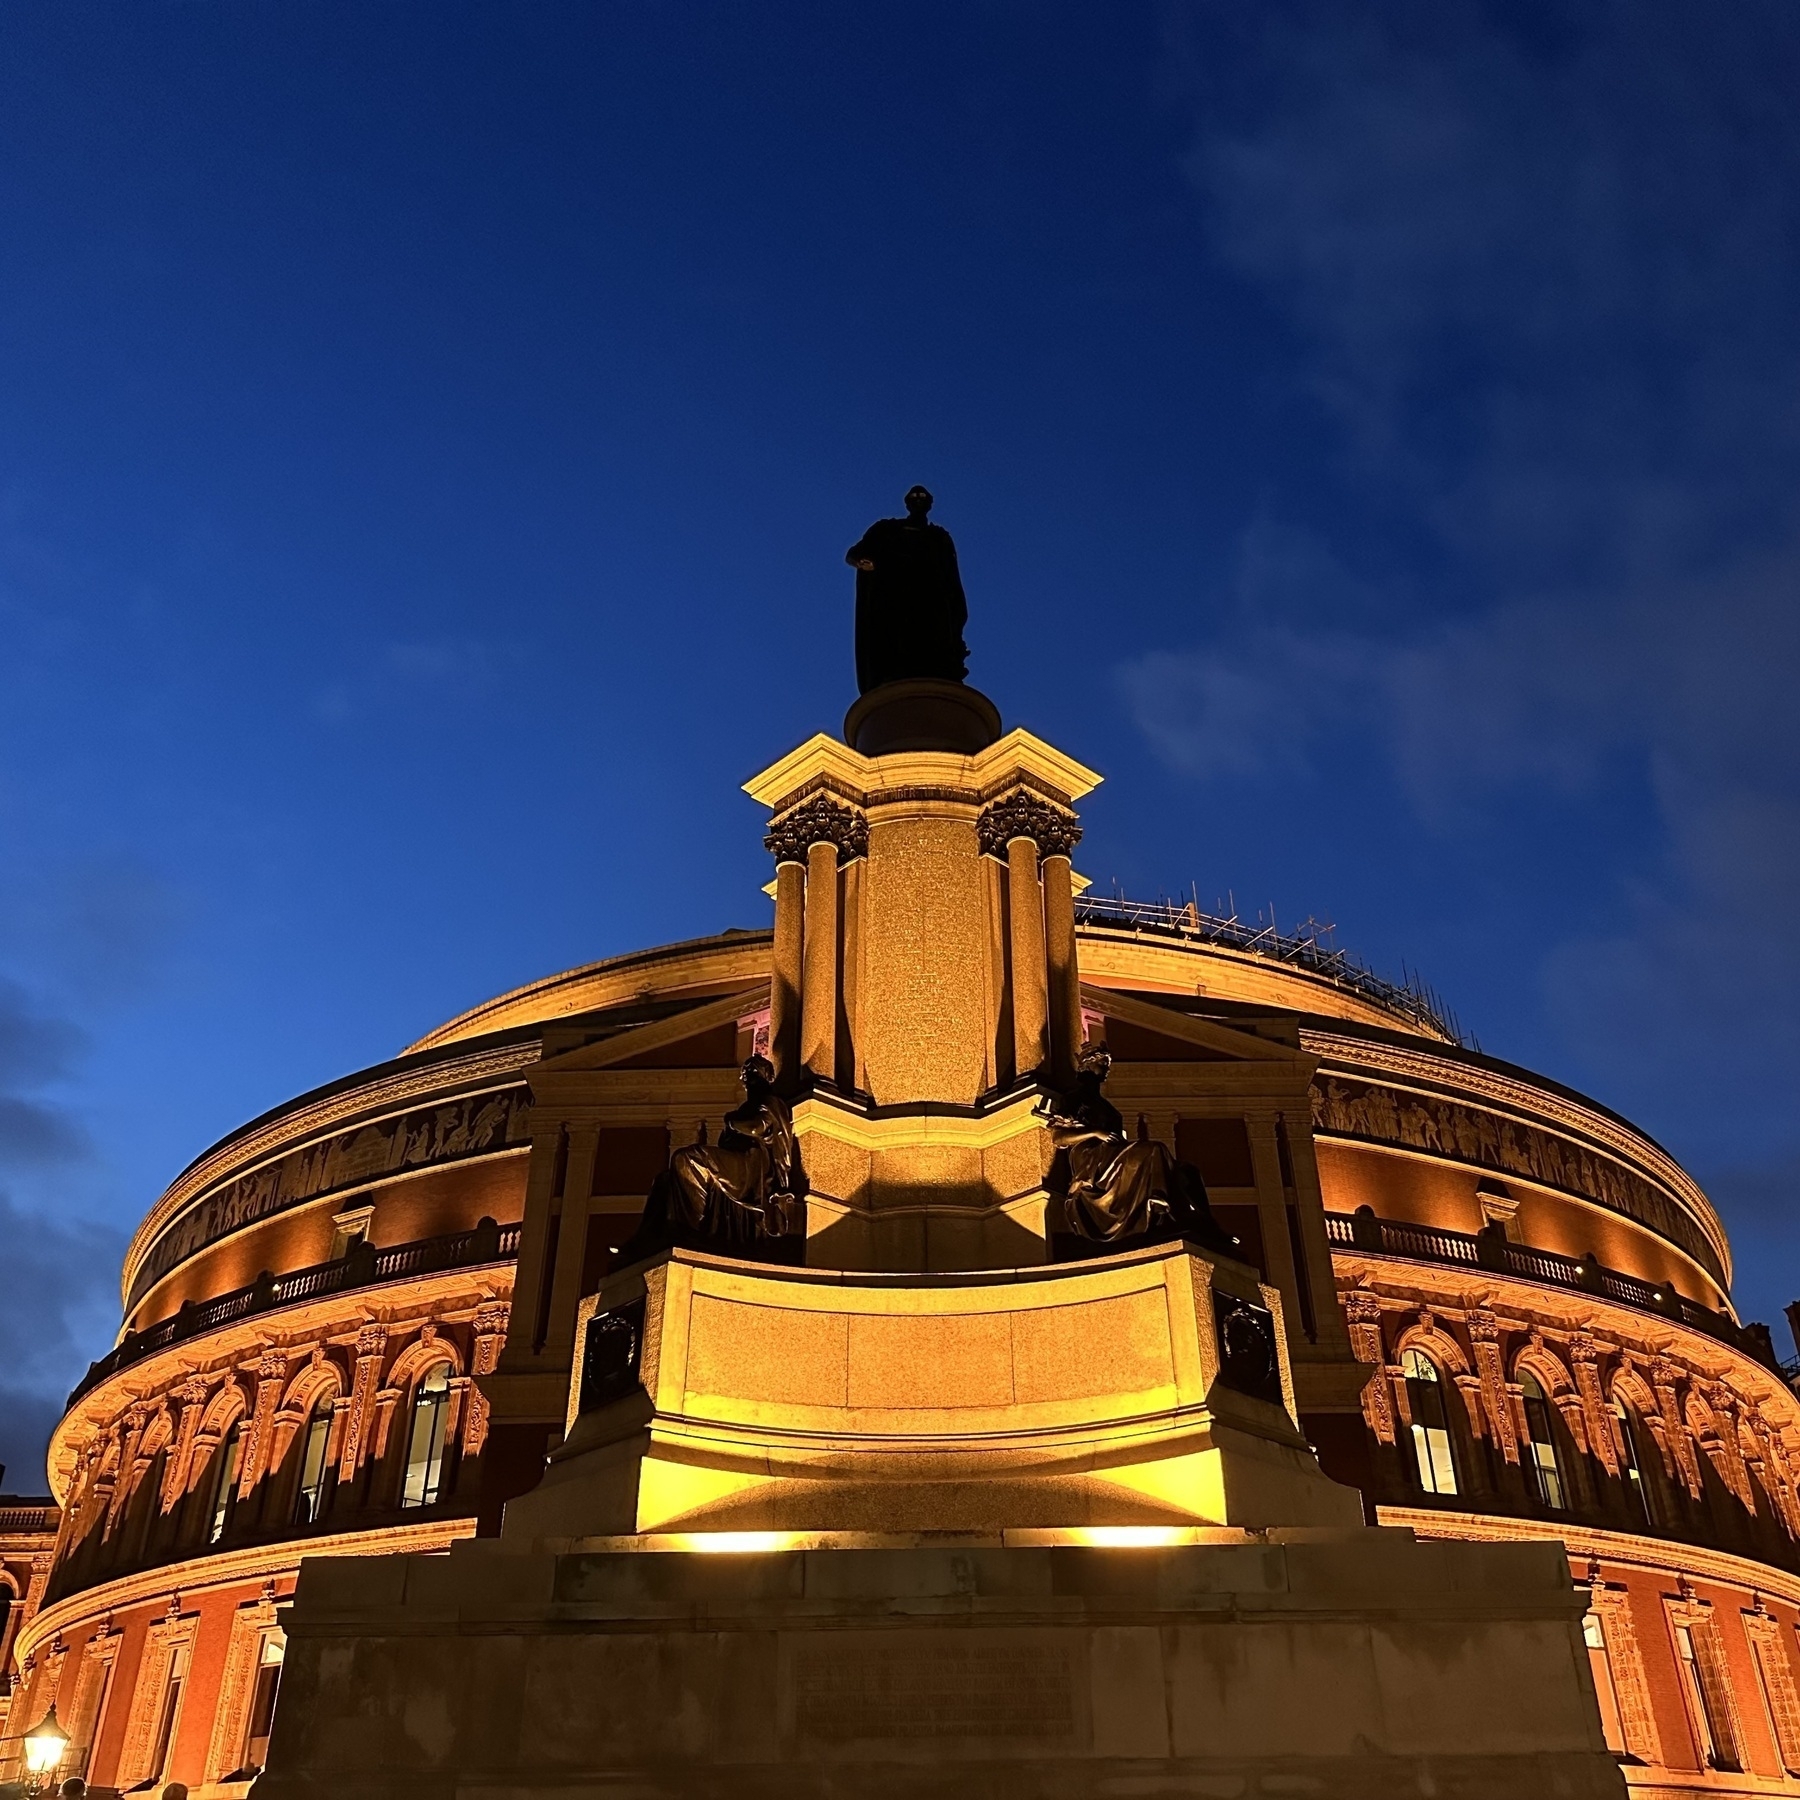 Silhouette of a statue against a dark blue sky at dusk, in front of the Royal Albert Hall.